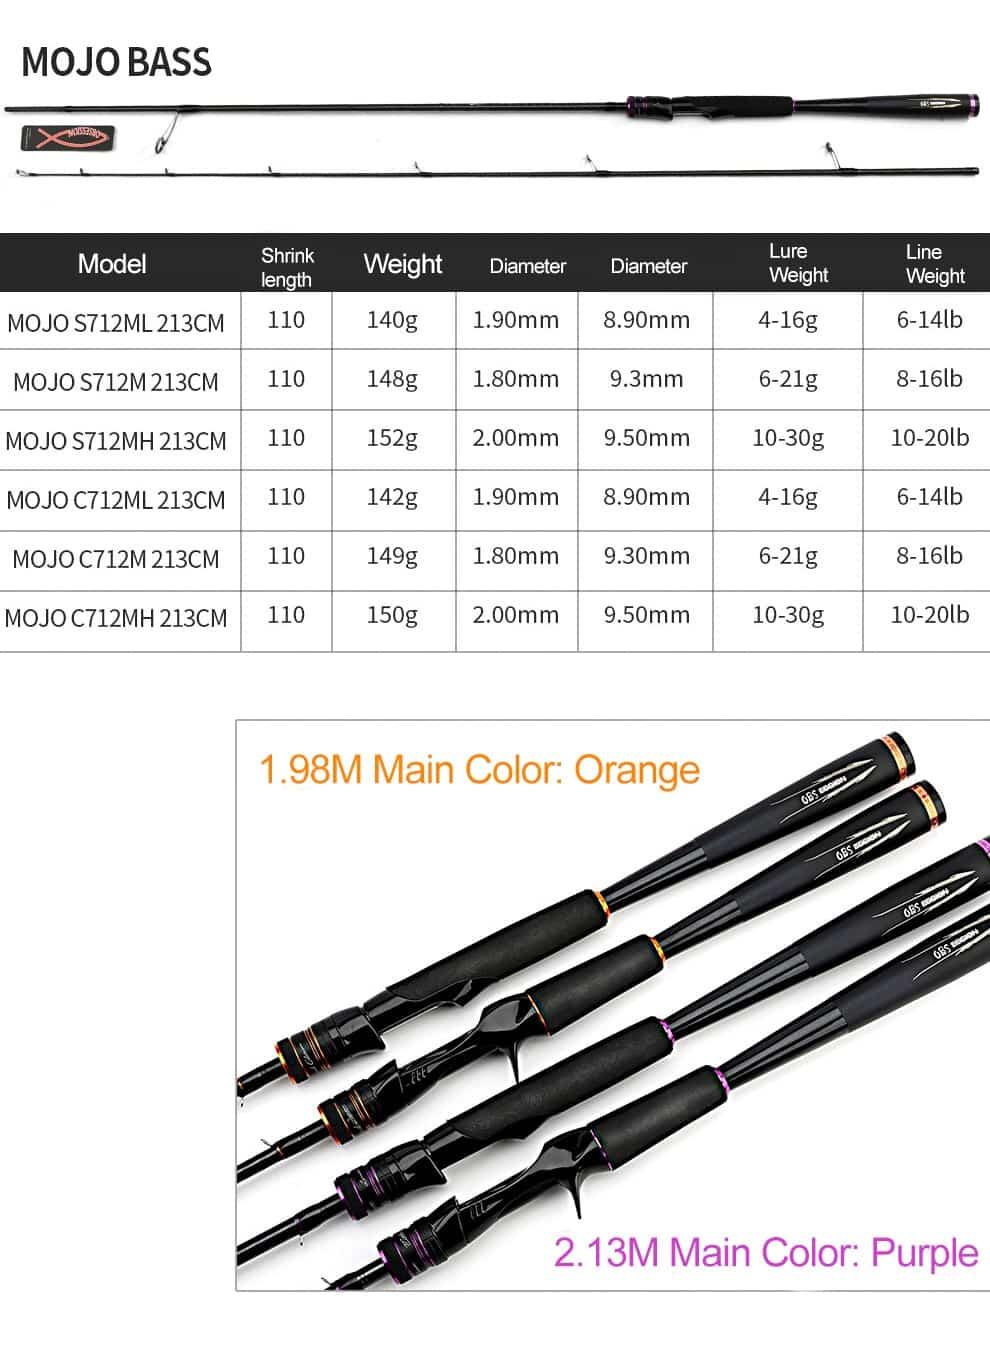 OBSESSION Carbon Spinning or Casting Fishing Rod 